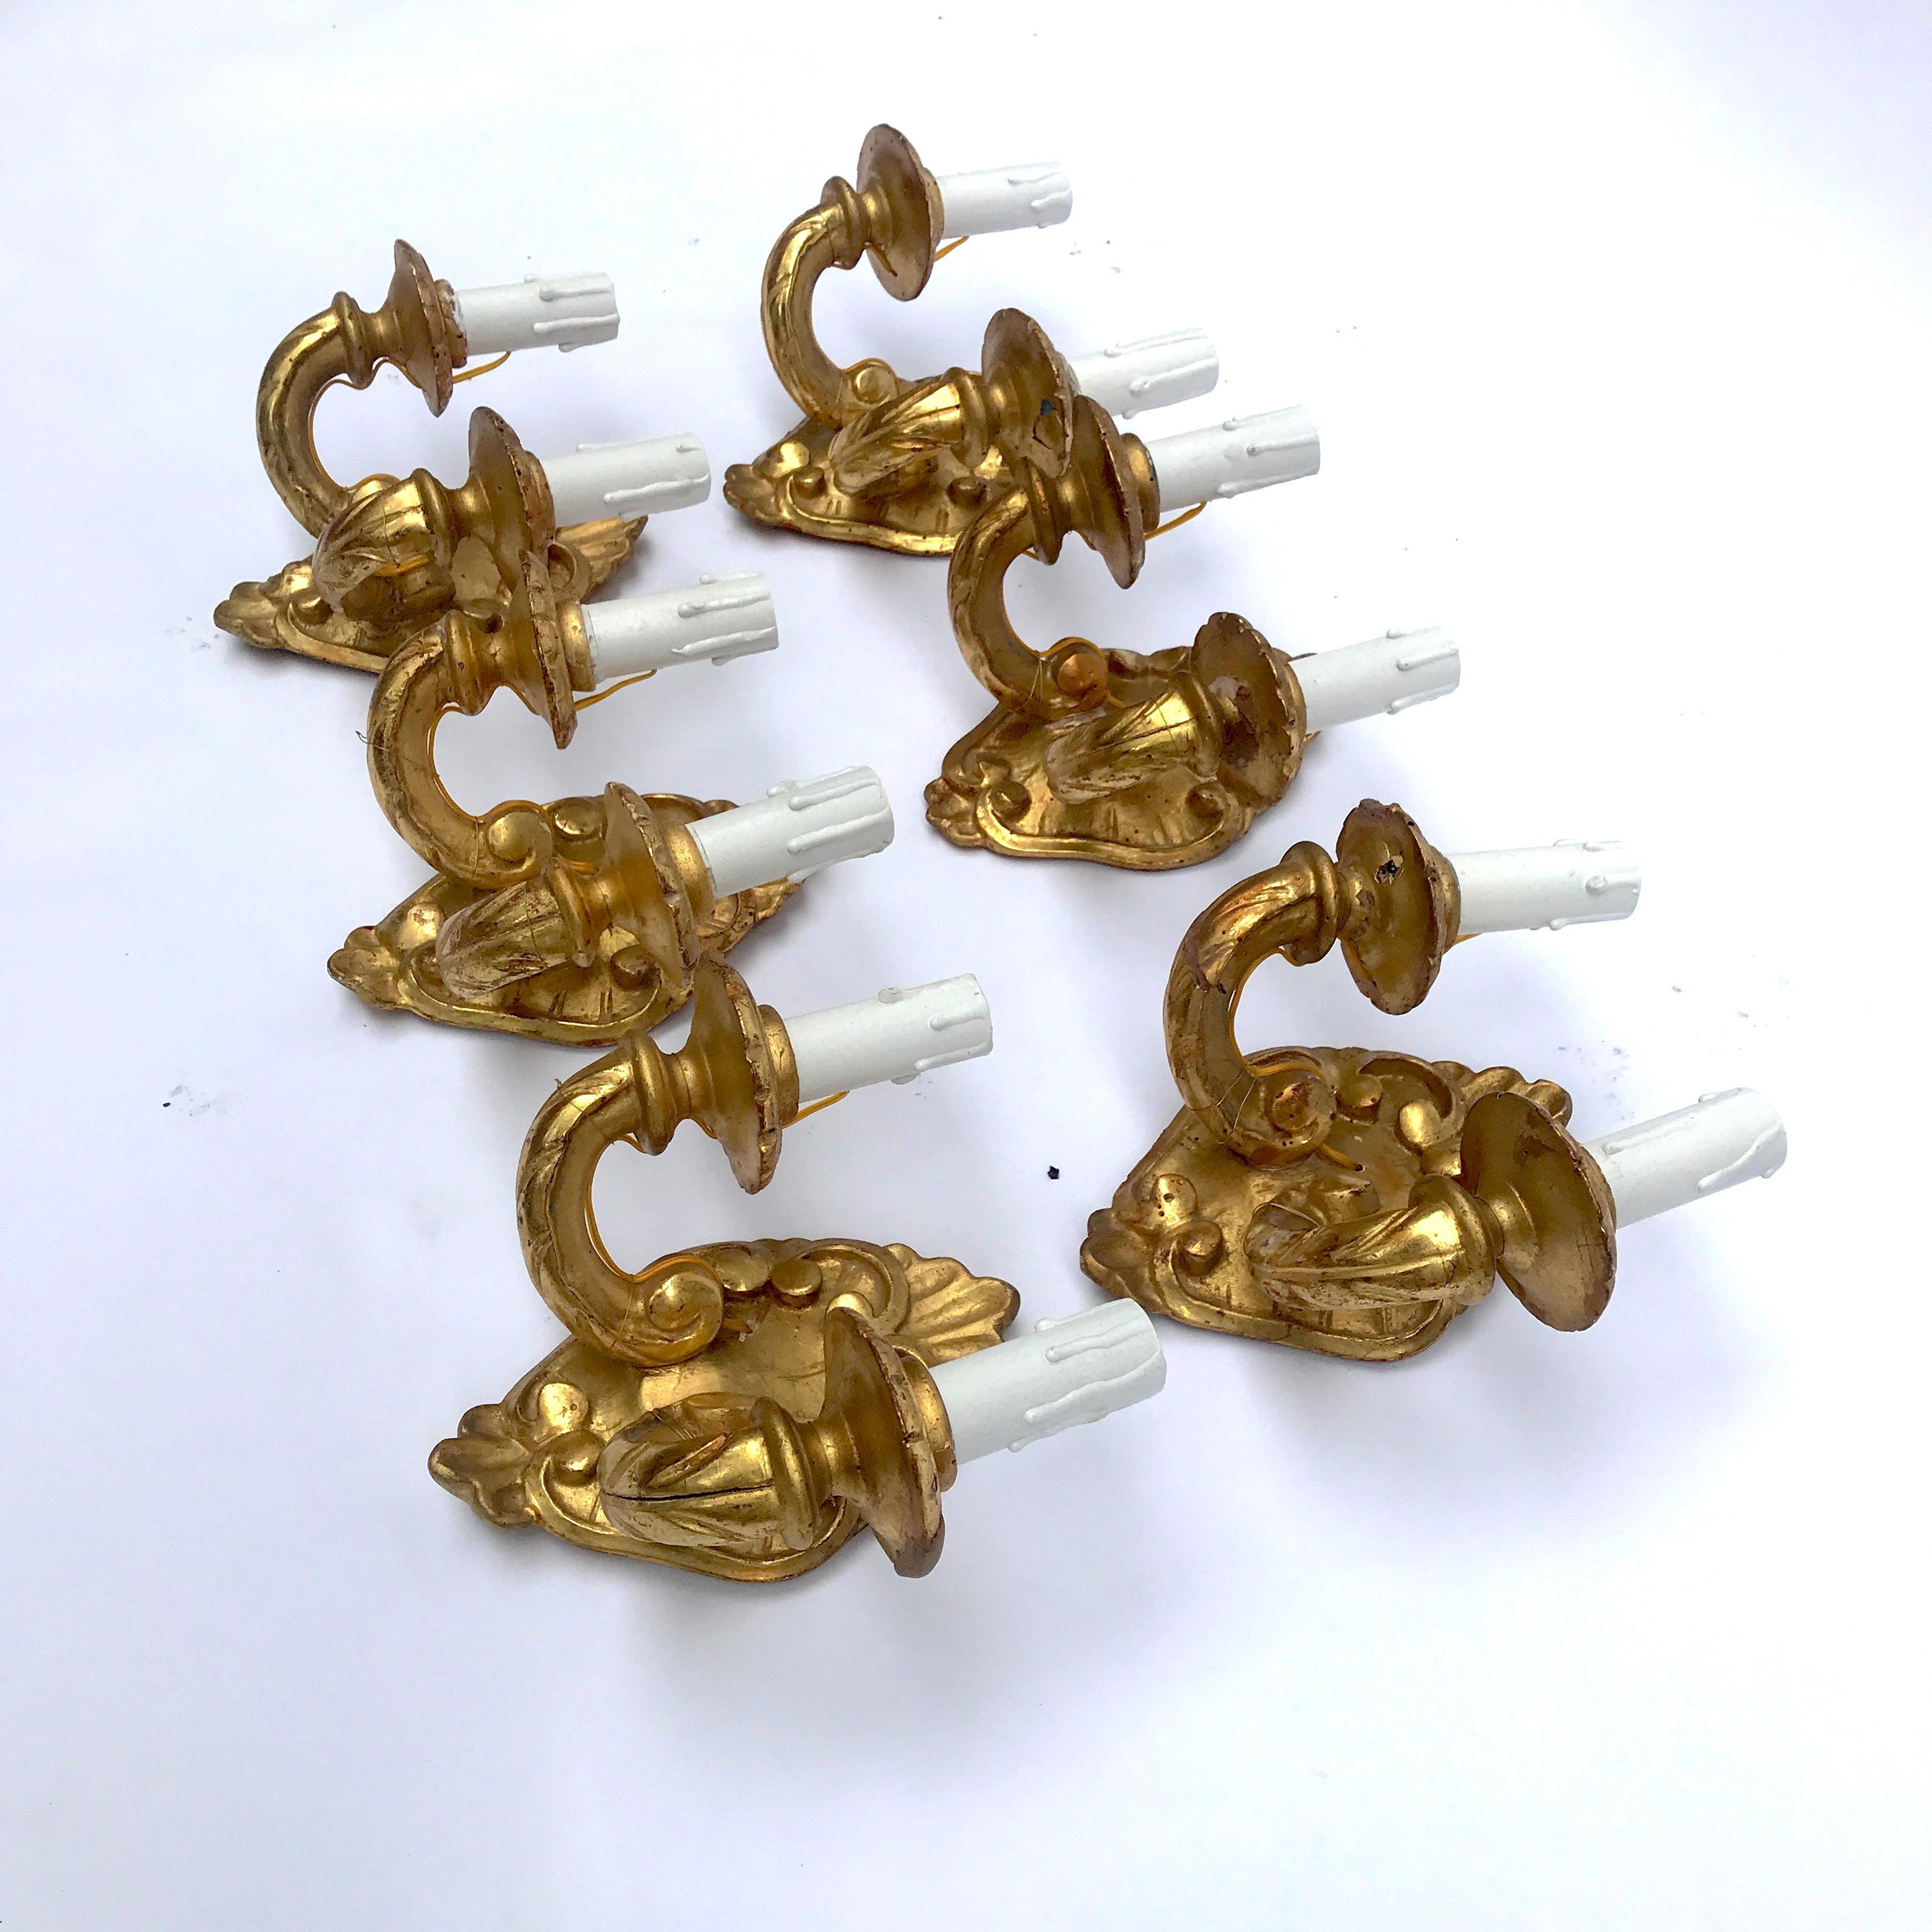 A set of six antique Italian giltwood sconces from Tuscany, shaped two-light sconces, realized in linden wood, carved with vegetal patterns, beautiful gilding, dating back to late 19th century. It is unusual finding a set of six antique Italian